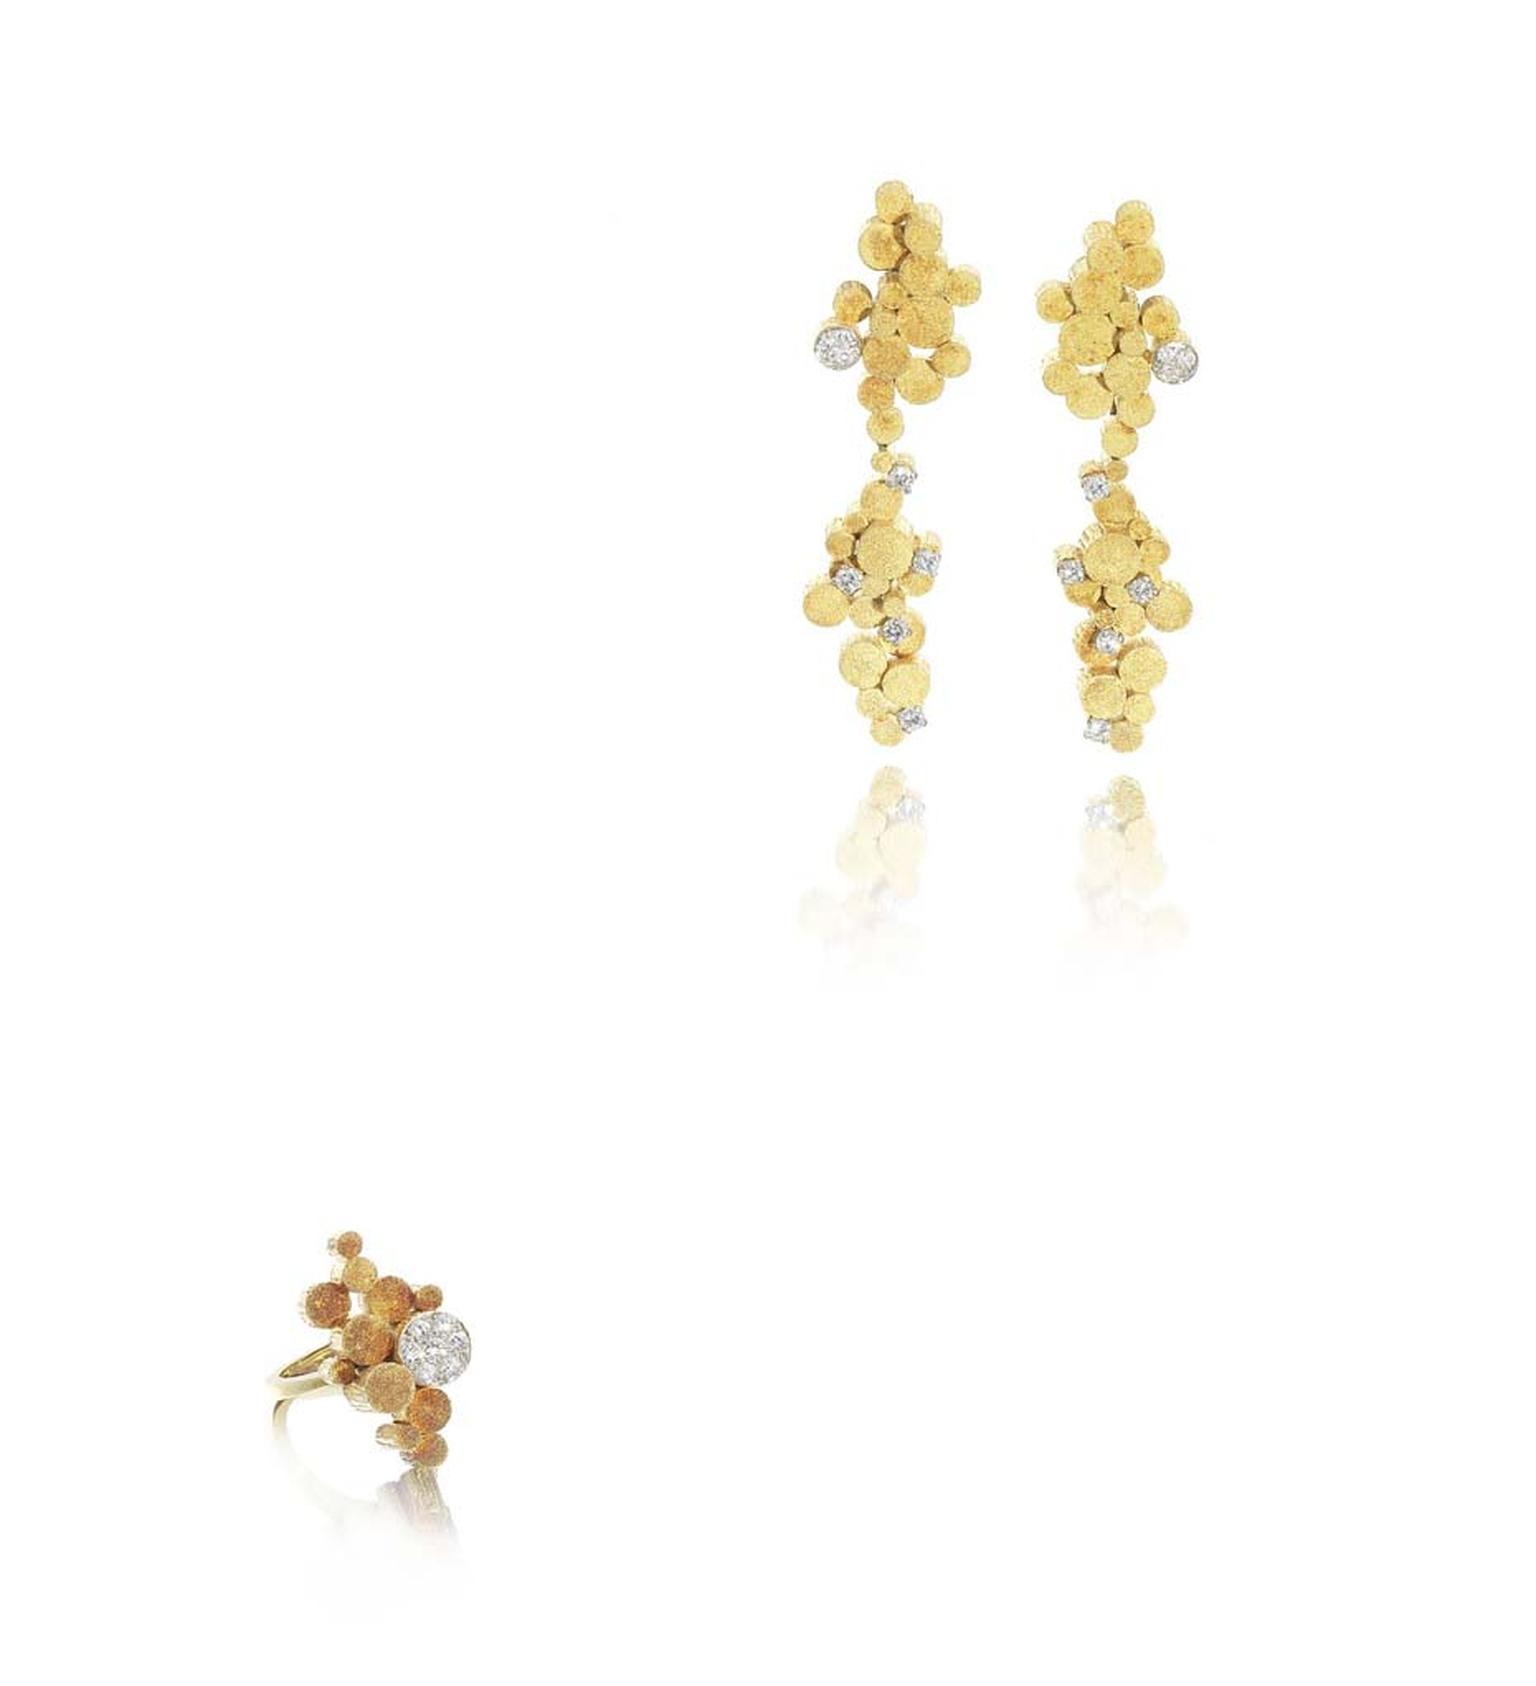 Lot 95, Andrew Grima gold and diamond Night and Day earrings and ring suite. Sold for £15,000 (estimate: £3,000-4,000)